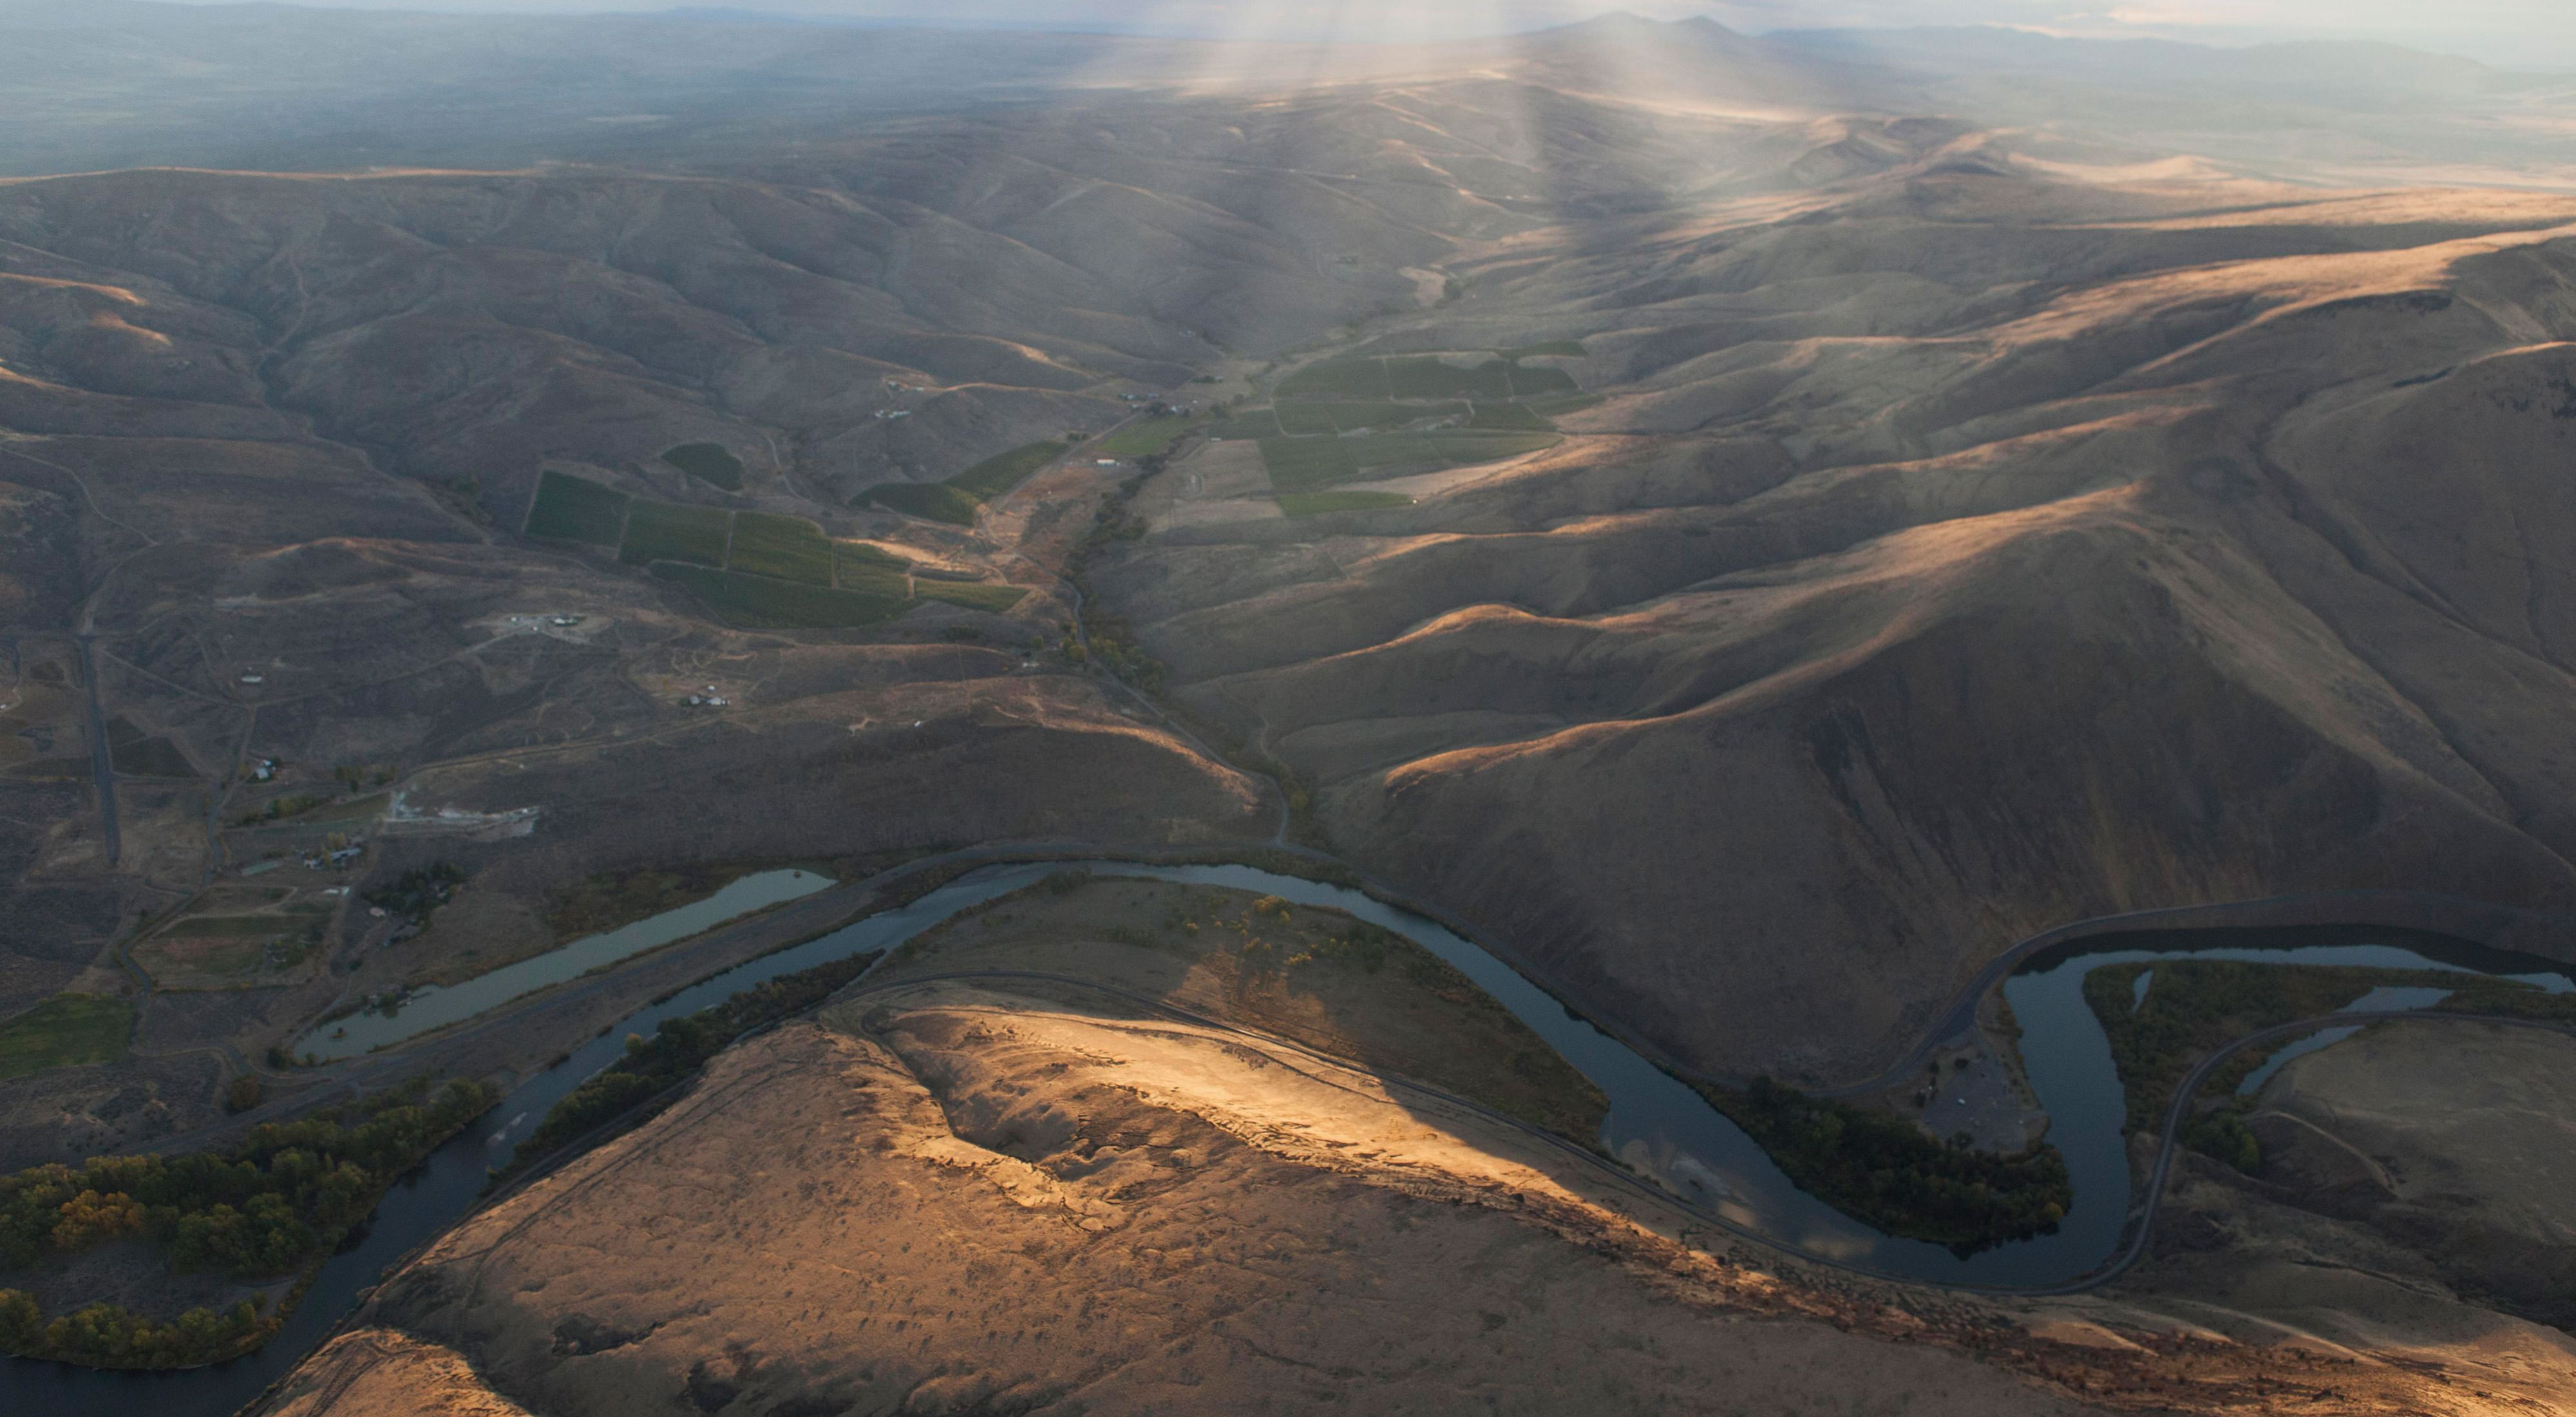 Aerial view of sunlight rays casting a shadow over arid hills and winding river.